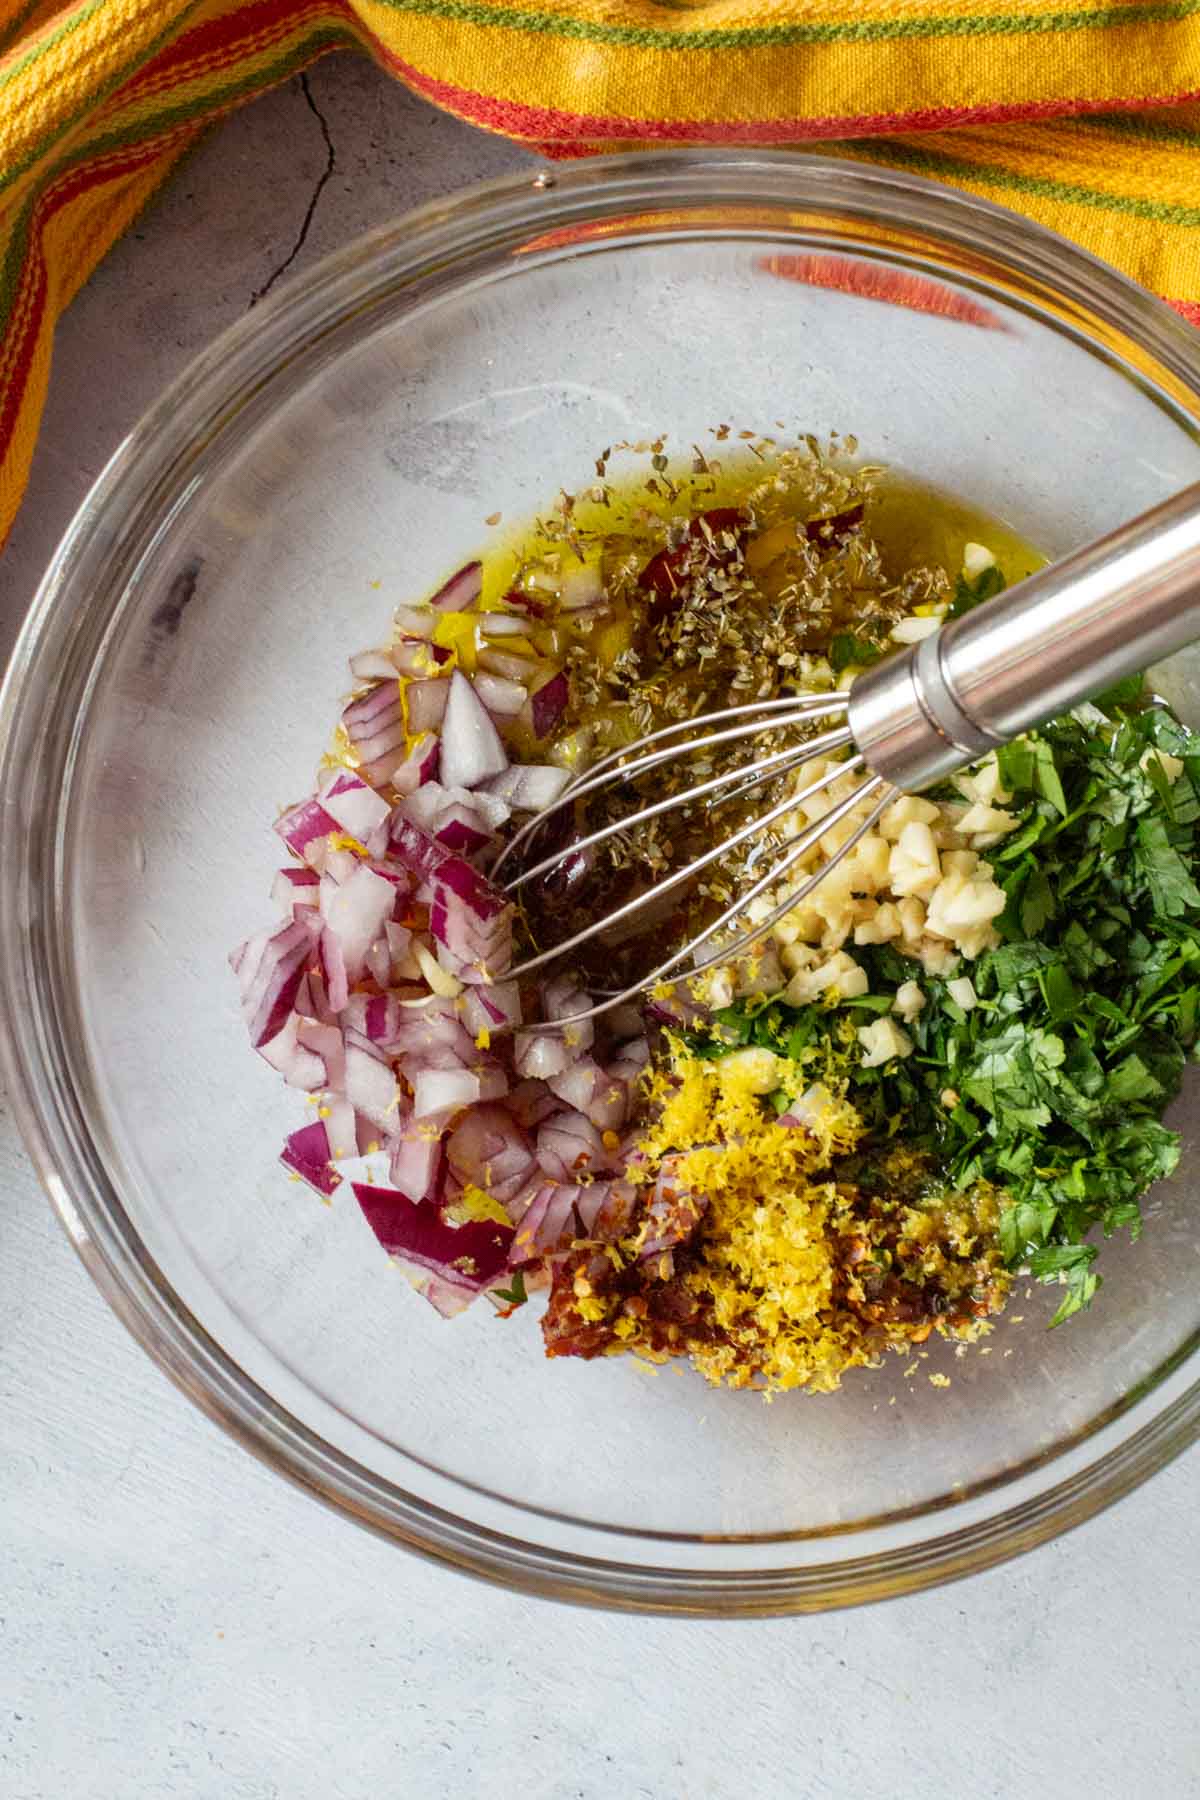 Chopped ingredients in a glass bowl to make flank steak chimichurri.